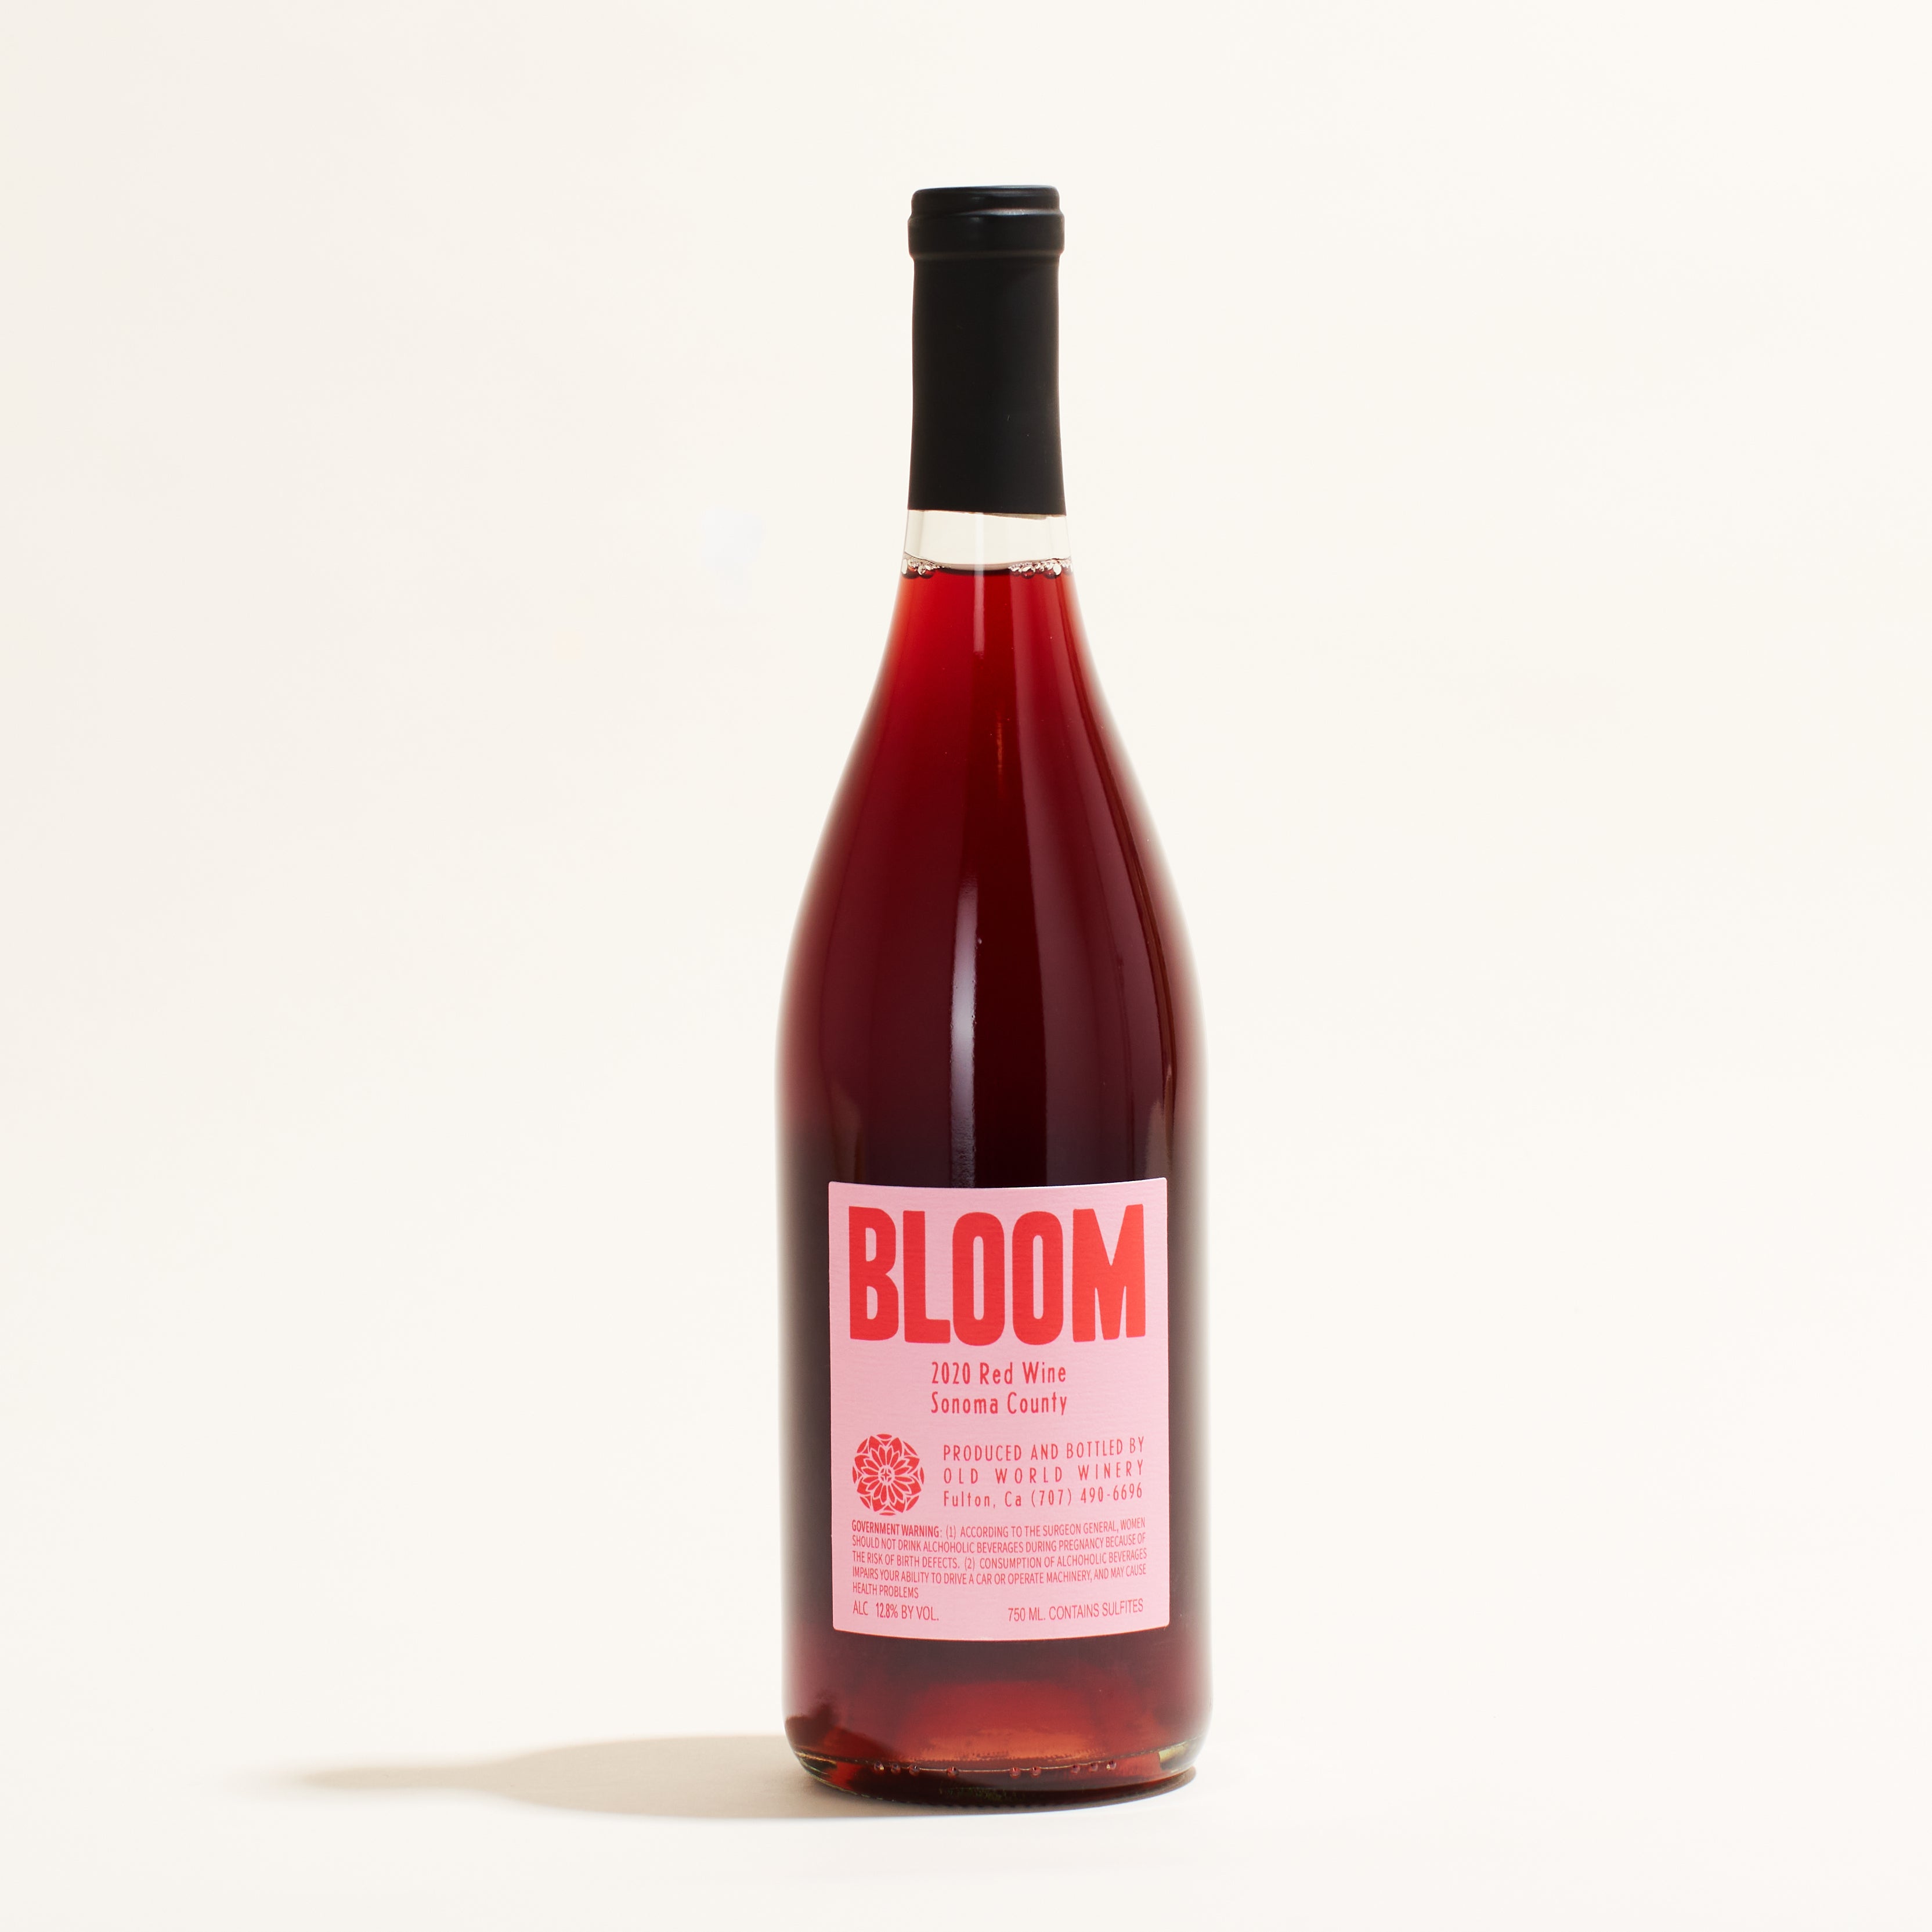 Bloom Old World Winery natural red wine California USA back